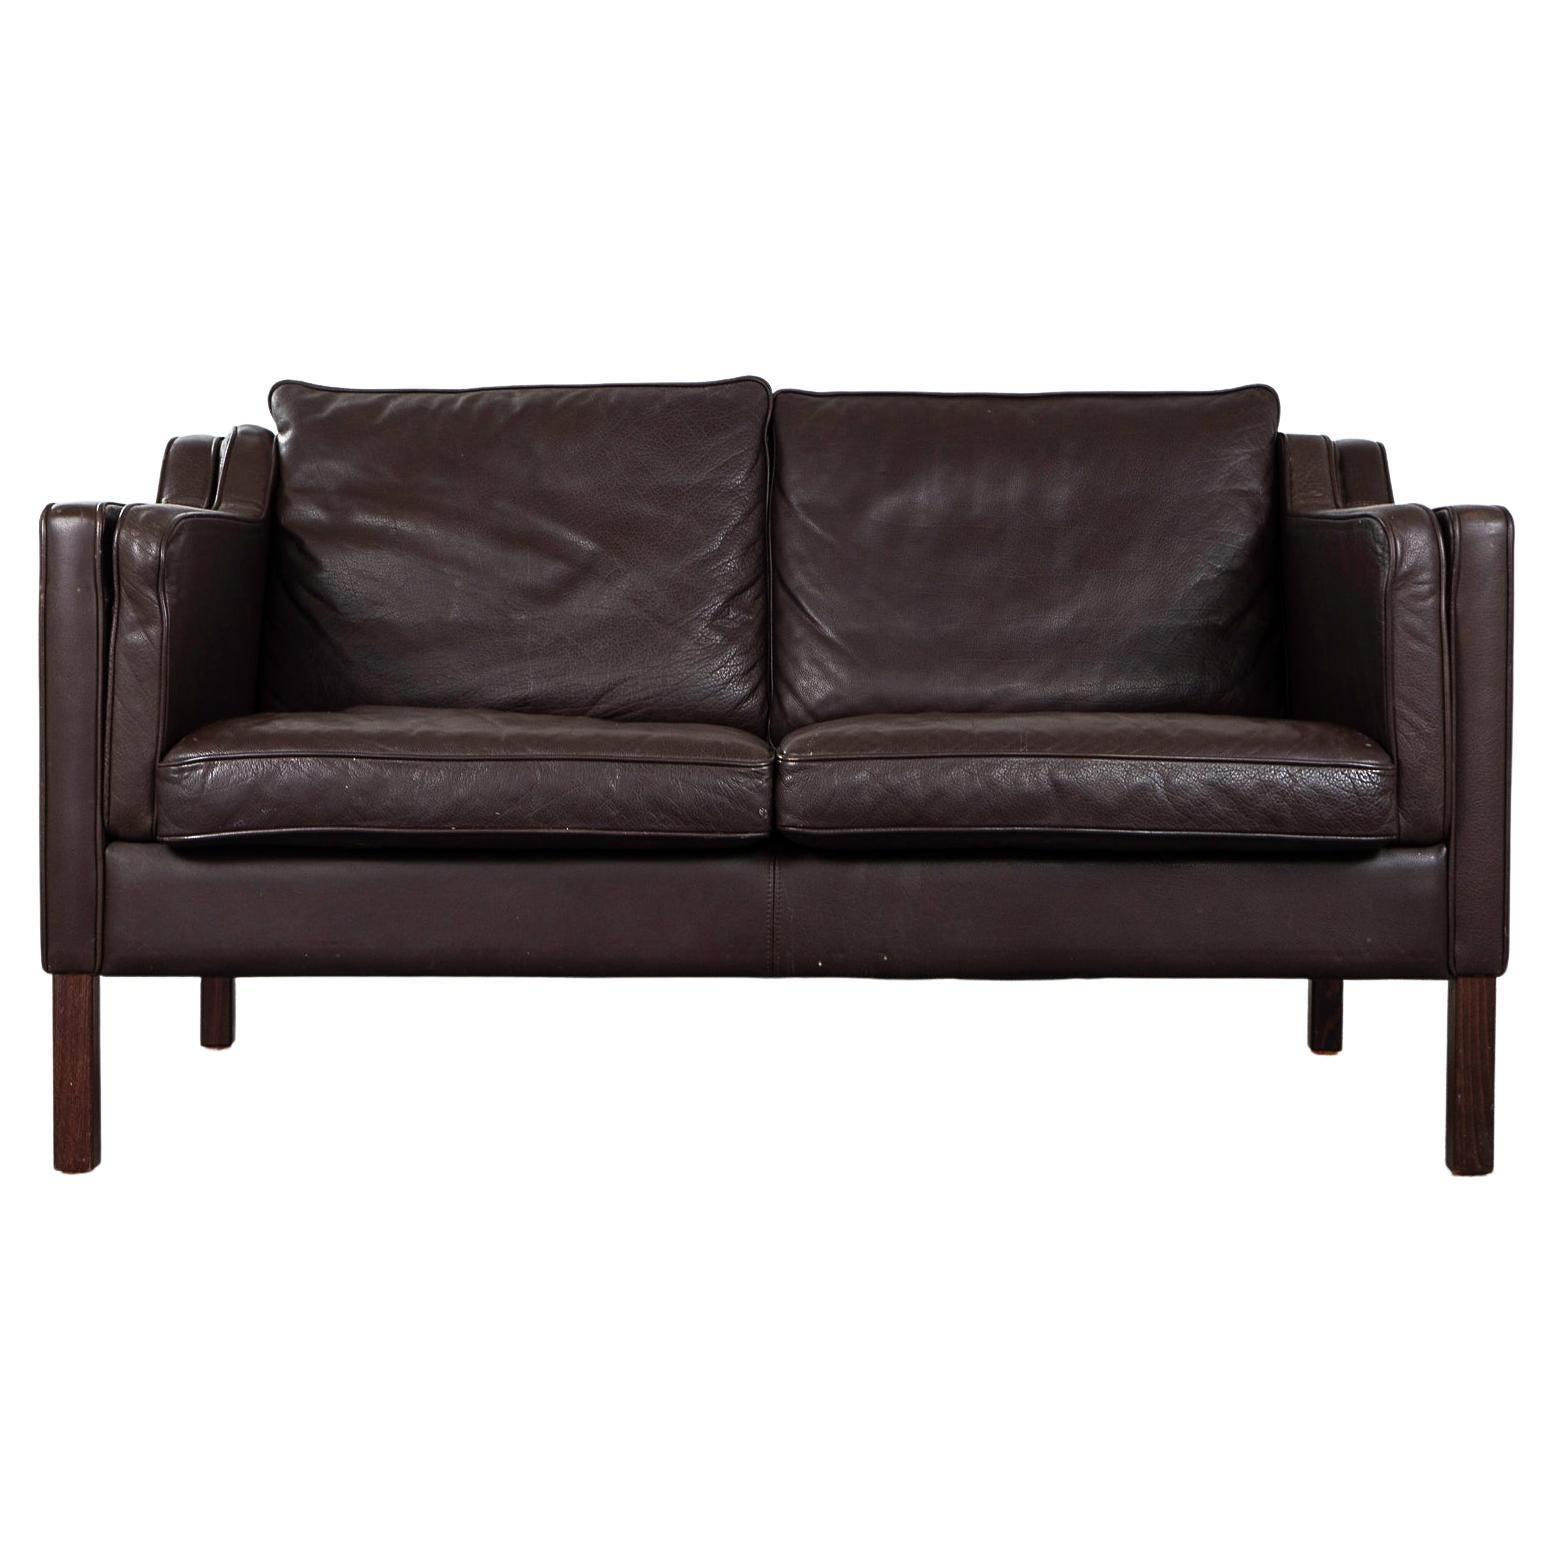 Danish Leather Dark Brown Loveseat by Stouby For Sale